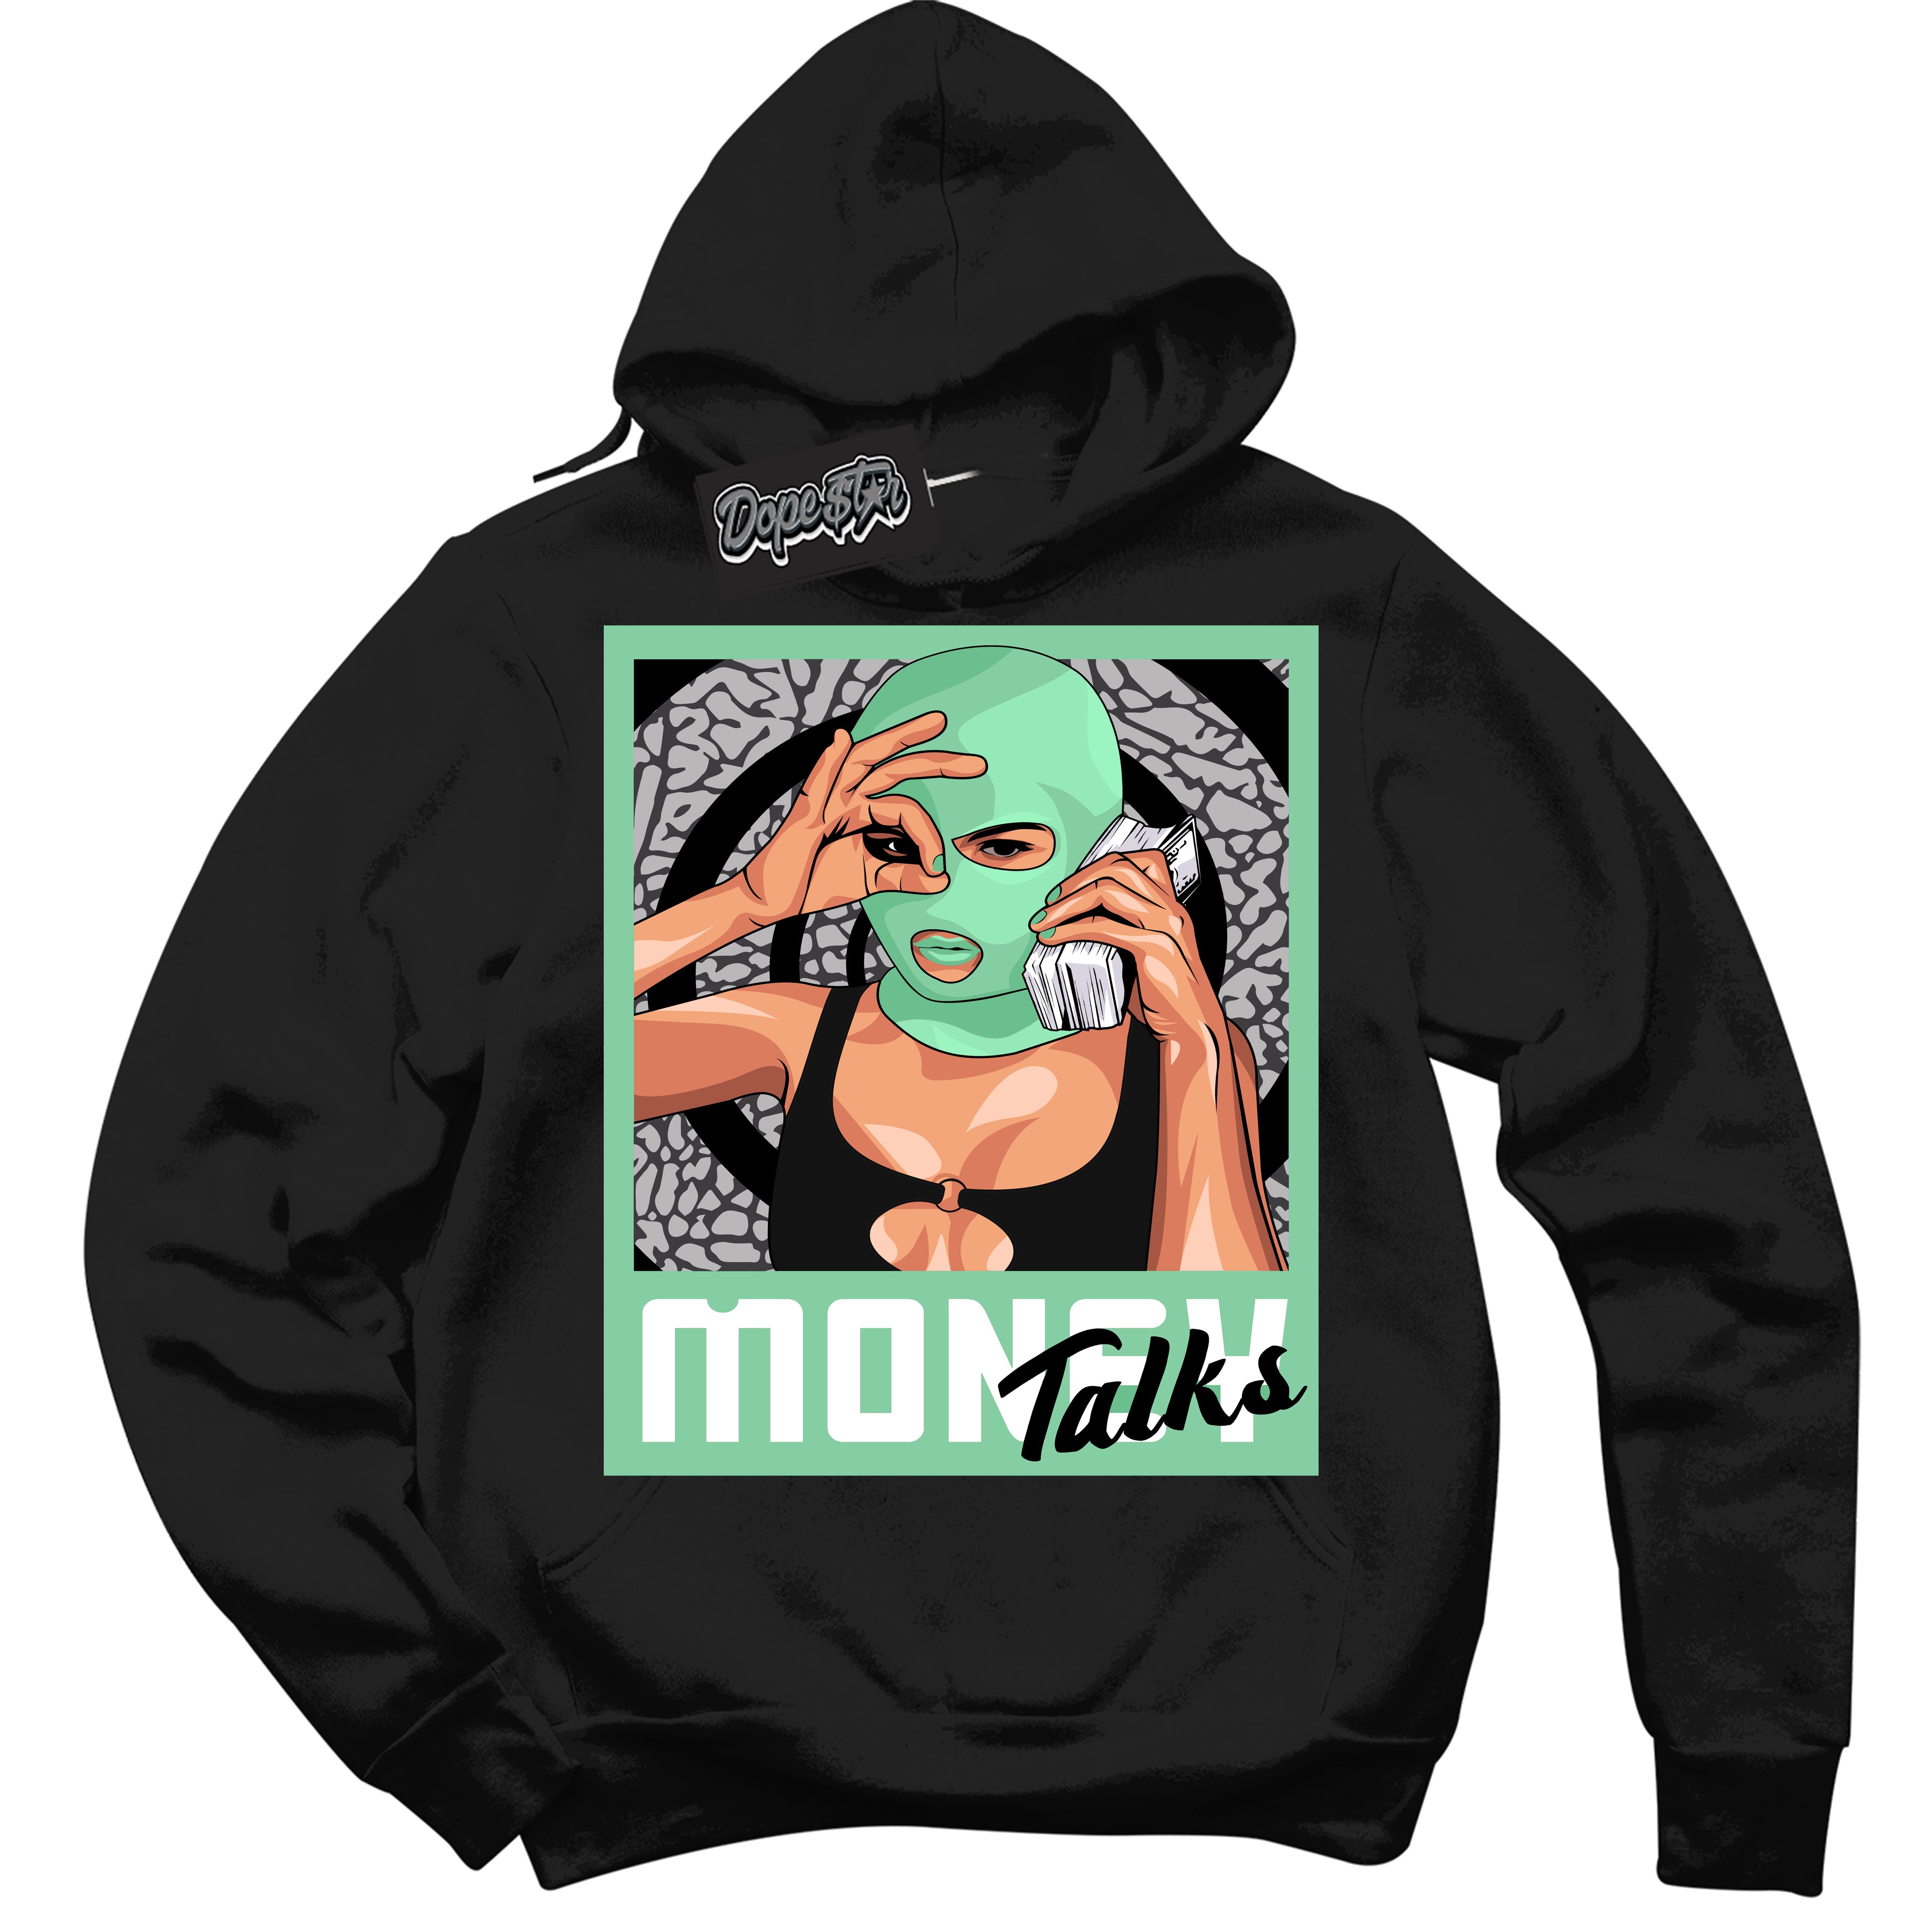 Cool Black Graphic DopeStar Hoodie with “ Money Talks “ print, that perfectly matches Green Glow 3S sneakers